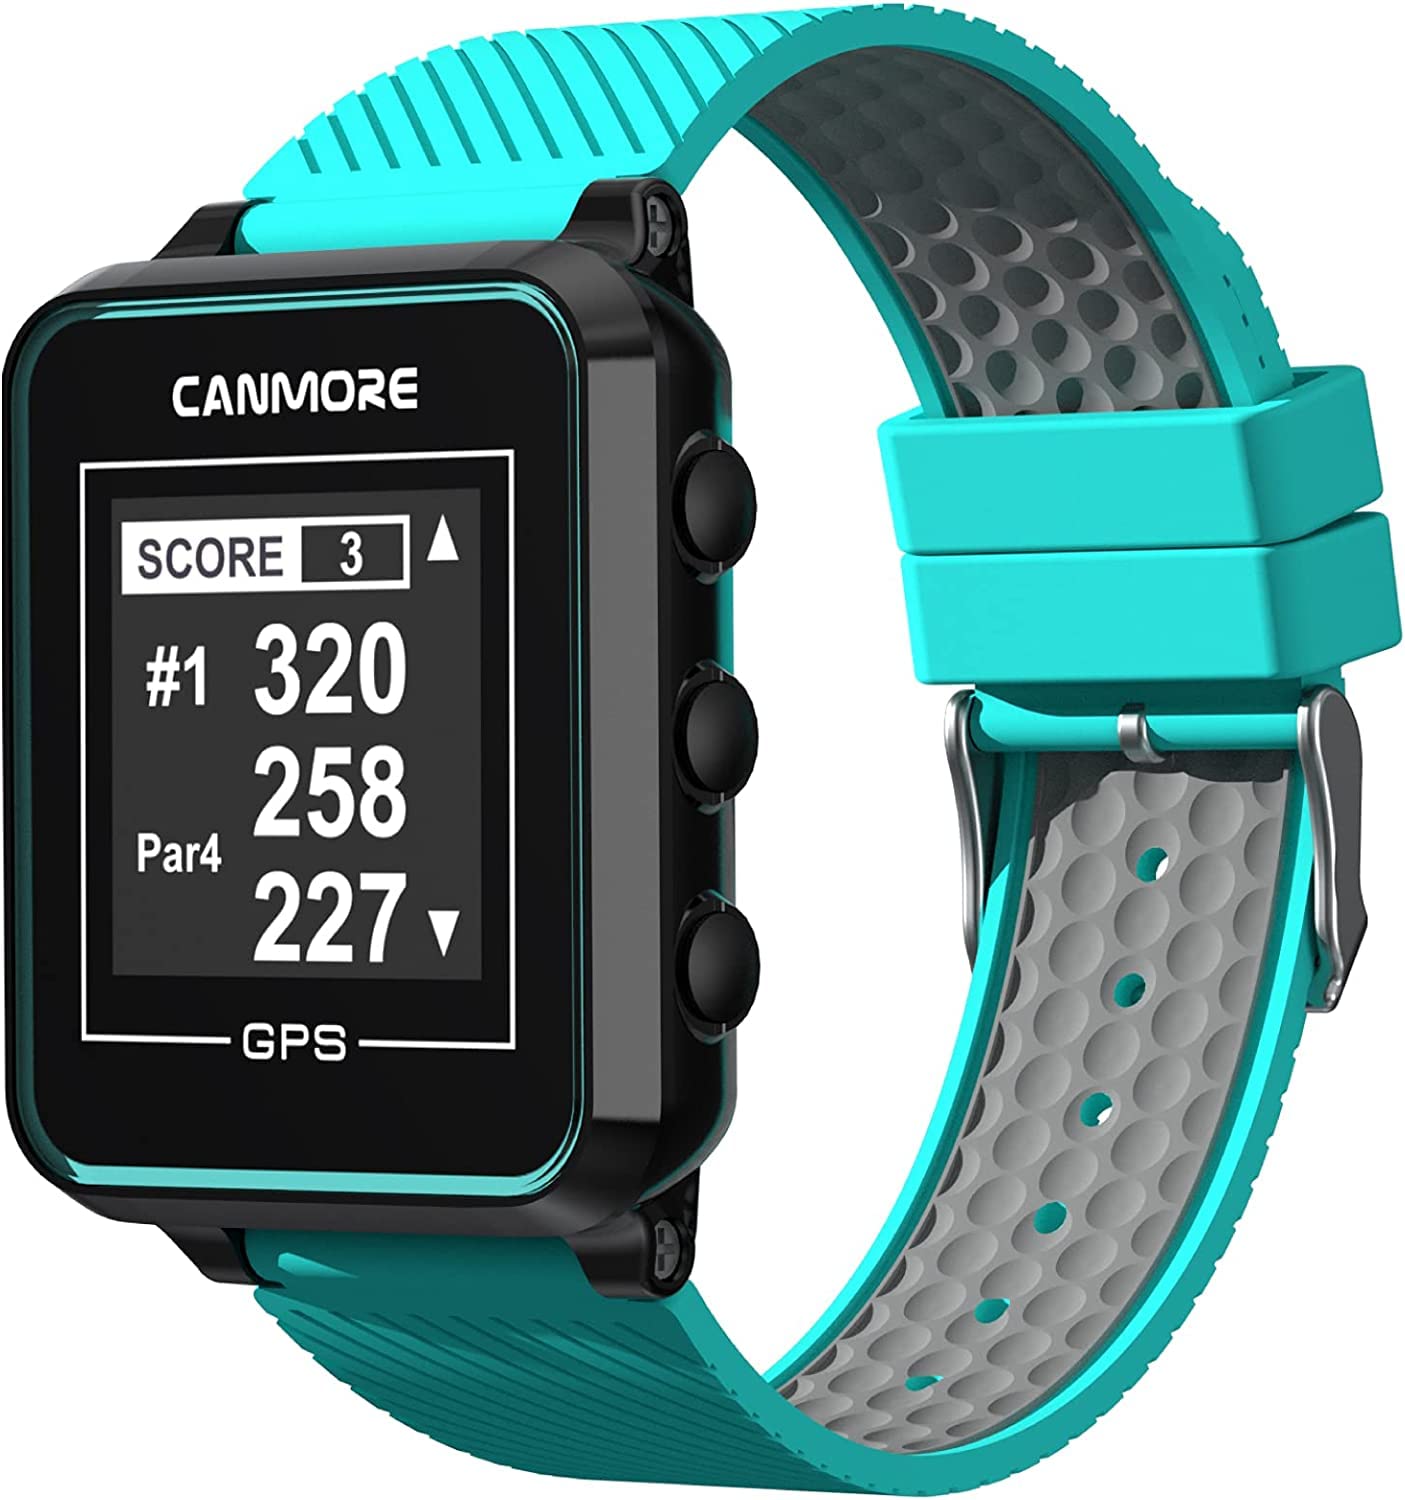 CANMORE TW353 Golf GPS Watch for Men and Women, High Contrast LCD Display, Free Update Over 40,000 Preloaded Courses Worldwide, Lightweight Essential Golf Accessory for Golfers, Turquoise/Gray